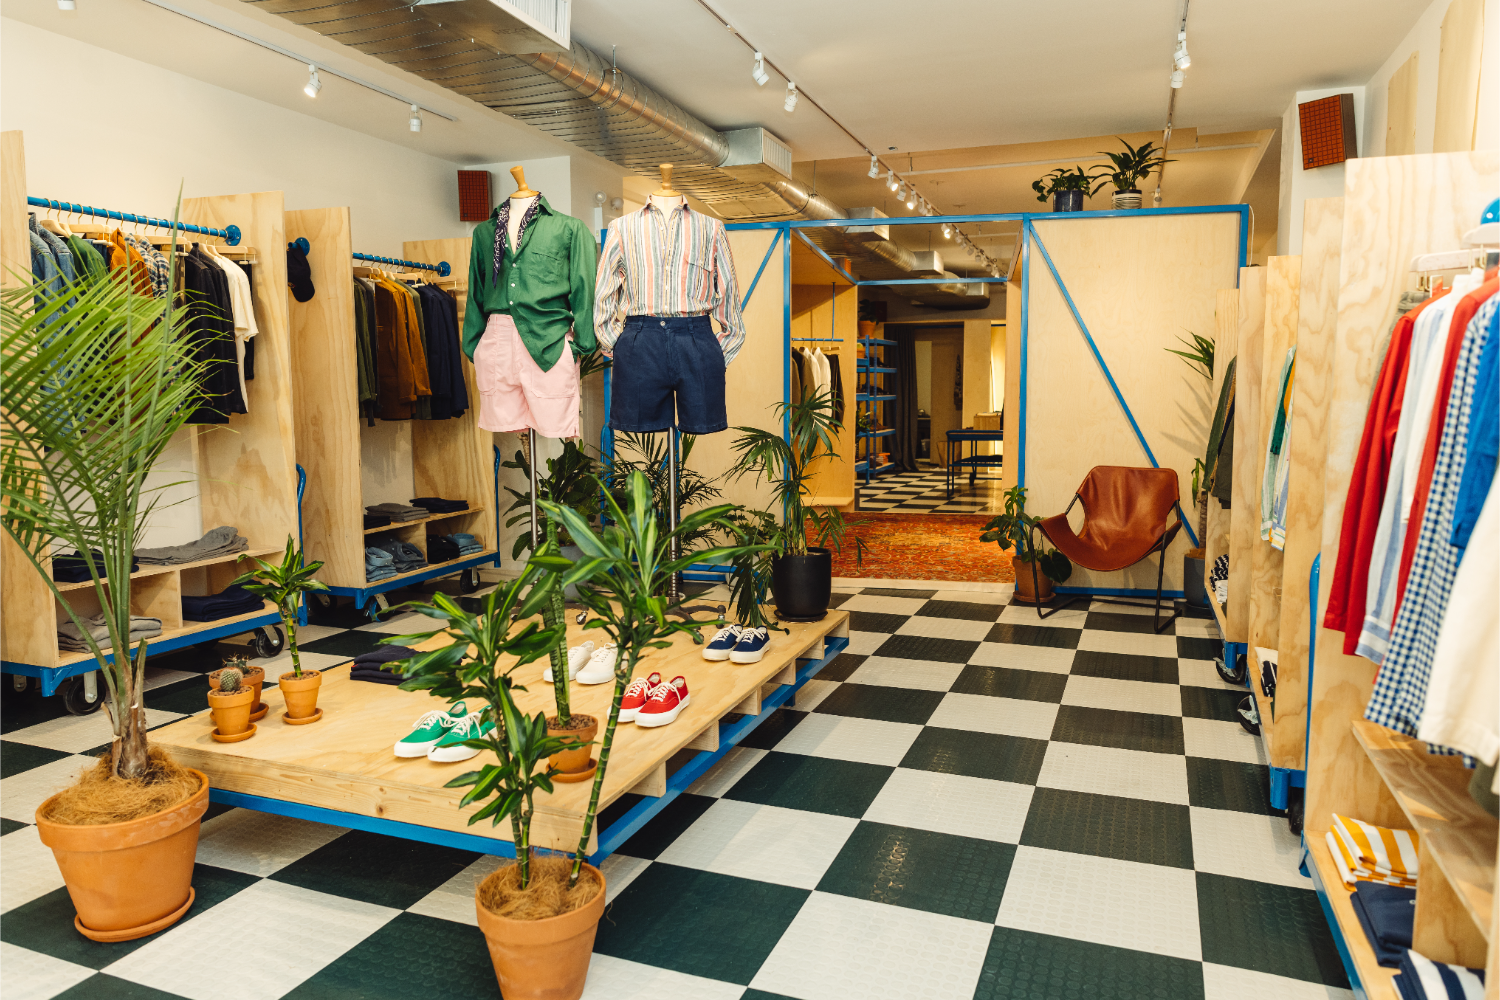 checkerboard floor, plants, mannequins with buttoned shirts and shorts, shoes on a wooden platform, clothes hanging 